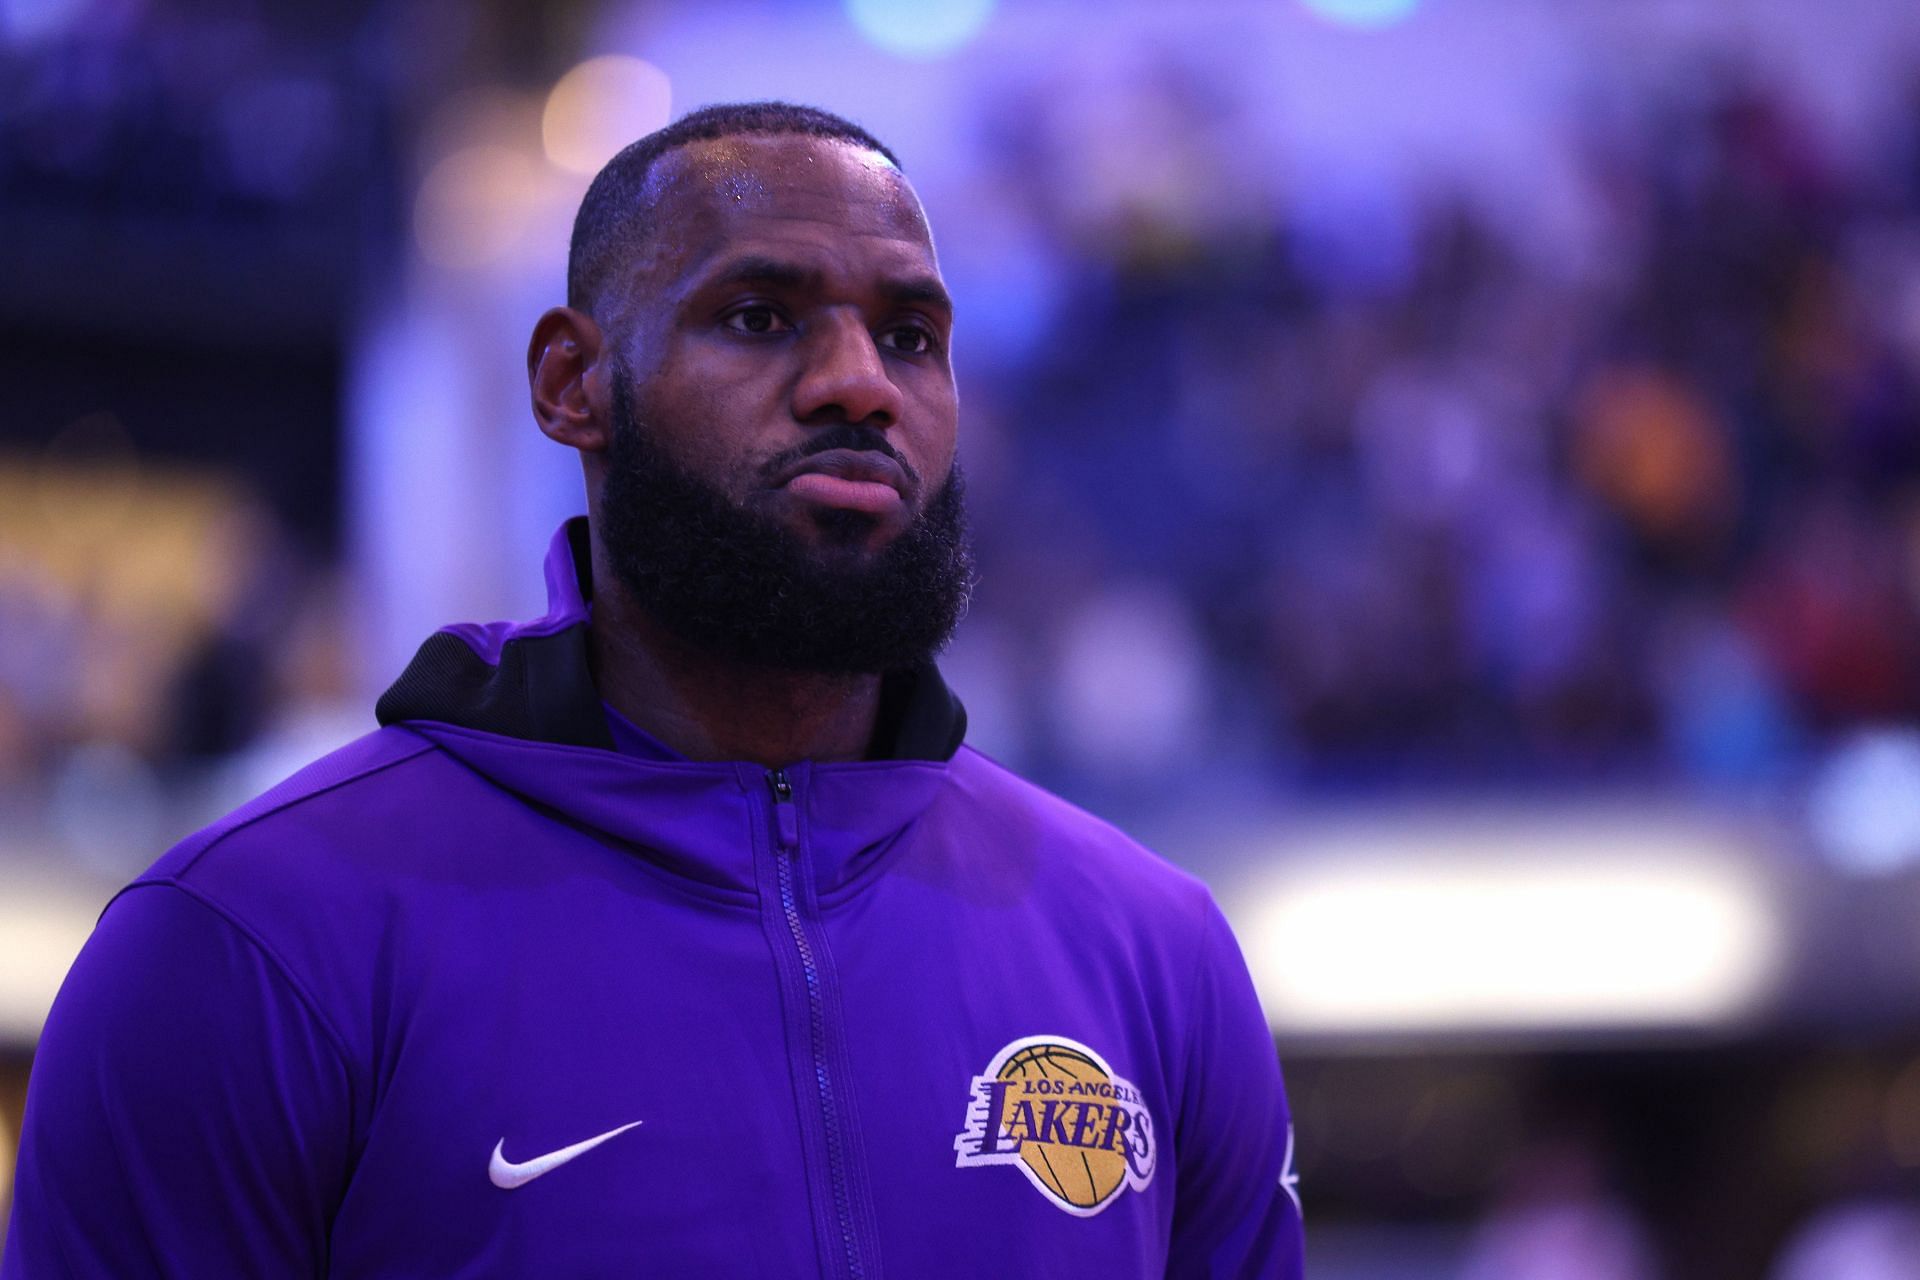 Anthony Davis says LA Lakers teammate LeBron James is doing well and is asymptomatic